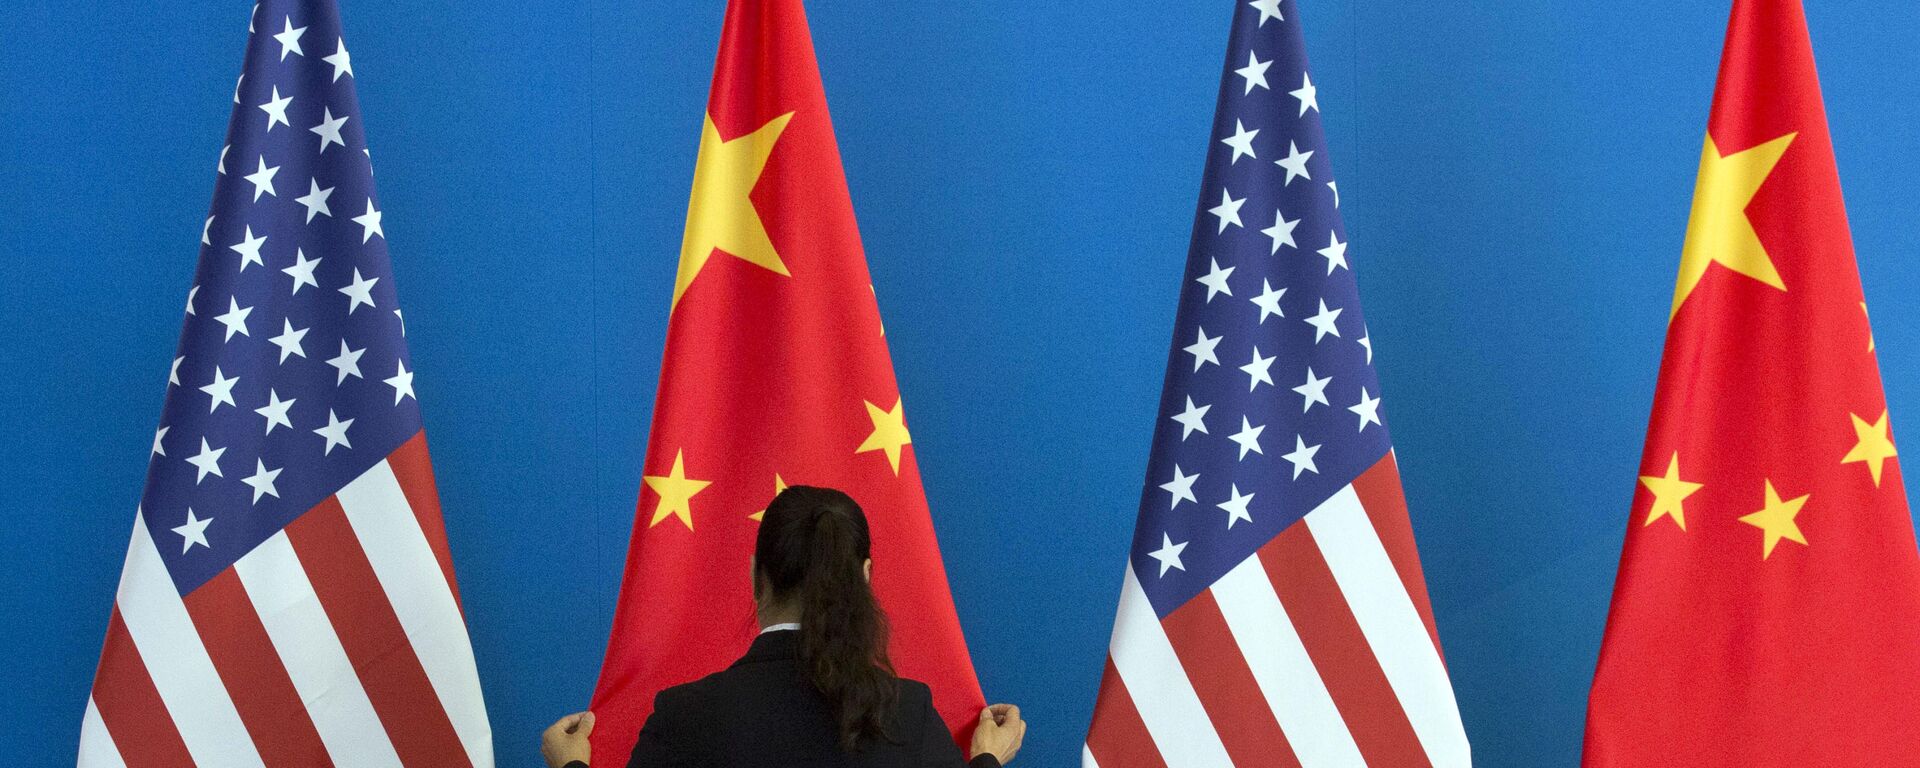 A Chinese woman adjusts the Chinese national flag near U.S. national flags before a Strategic Dialogue expanded meeting that's part of the U.S.-China Strategic and Economic Dialogue at the Diaoyutai State Guesthouse in Beijing, Thursday, July 10, 2014 - Sputnik International, 1920, 17.12.2021